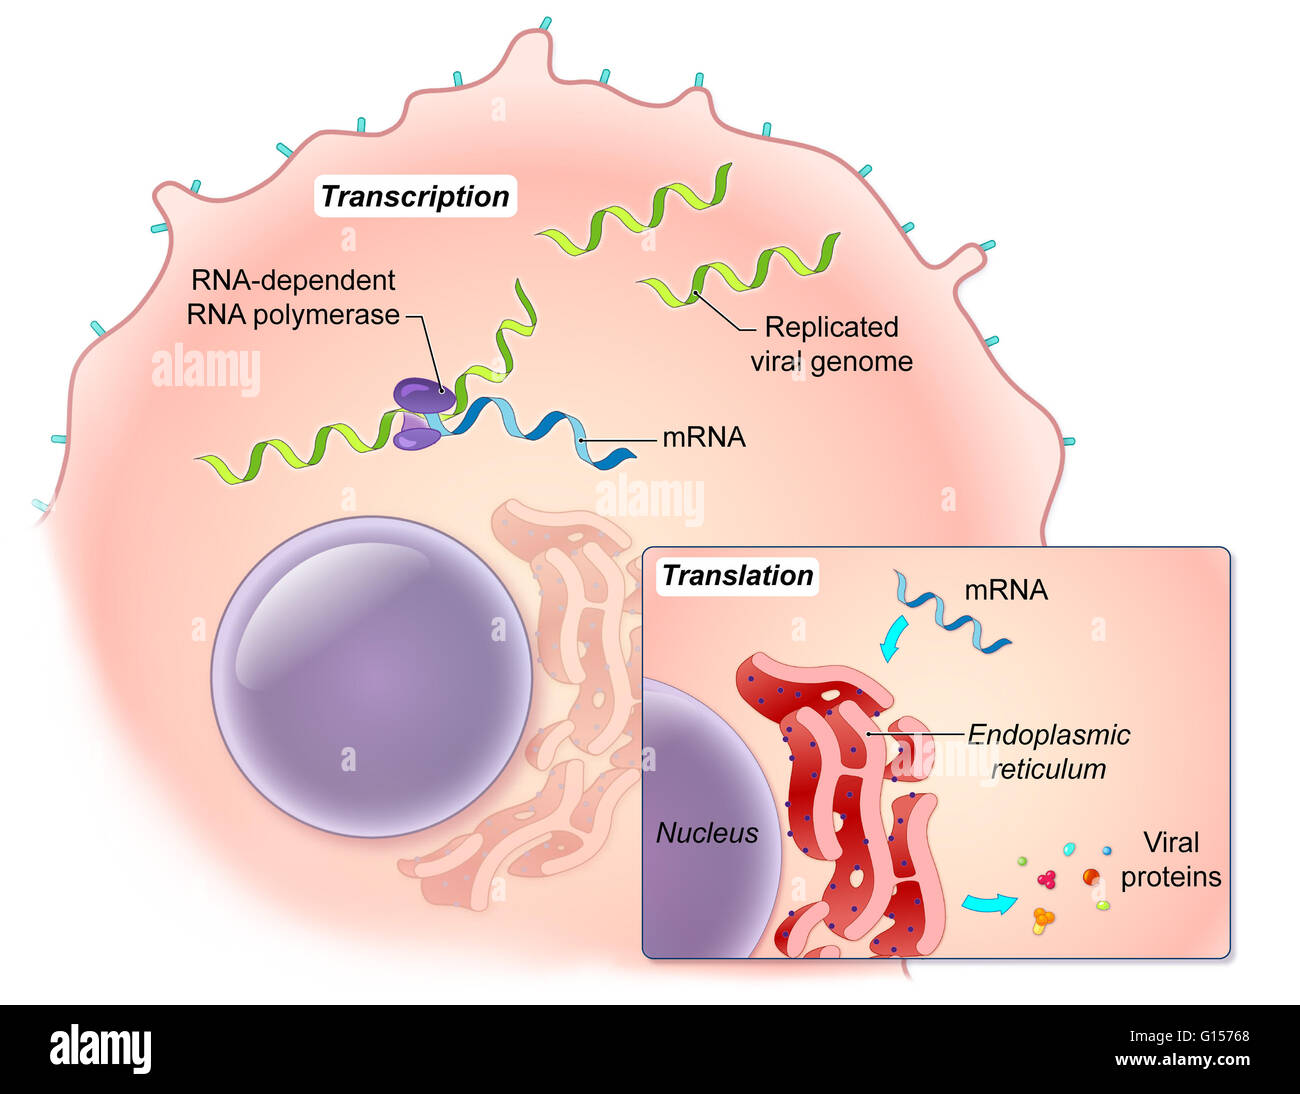 An illustrated diagram of the Ebola virus replication process. The ebola virus is a single-stranded RNA filovirus responsible for severe hemorrhagic fever in humans. In this illustration, viral RNA-dependent RNA polymerase transcribes the viral genome to Stock Photo